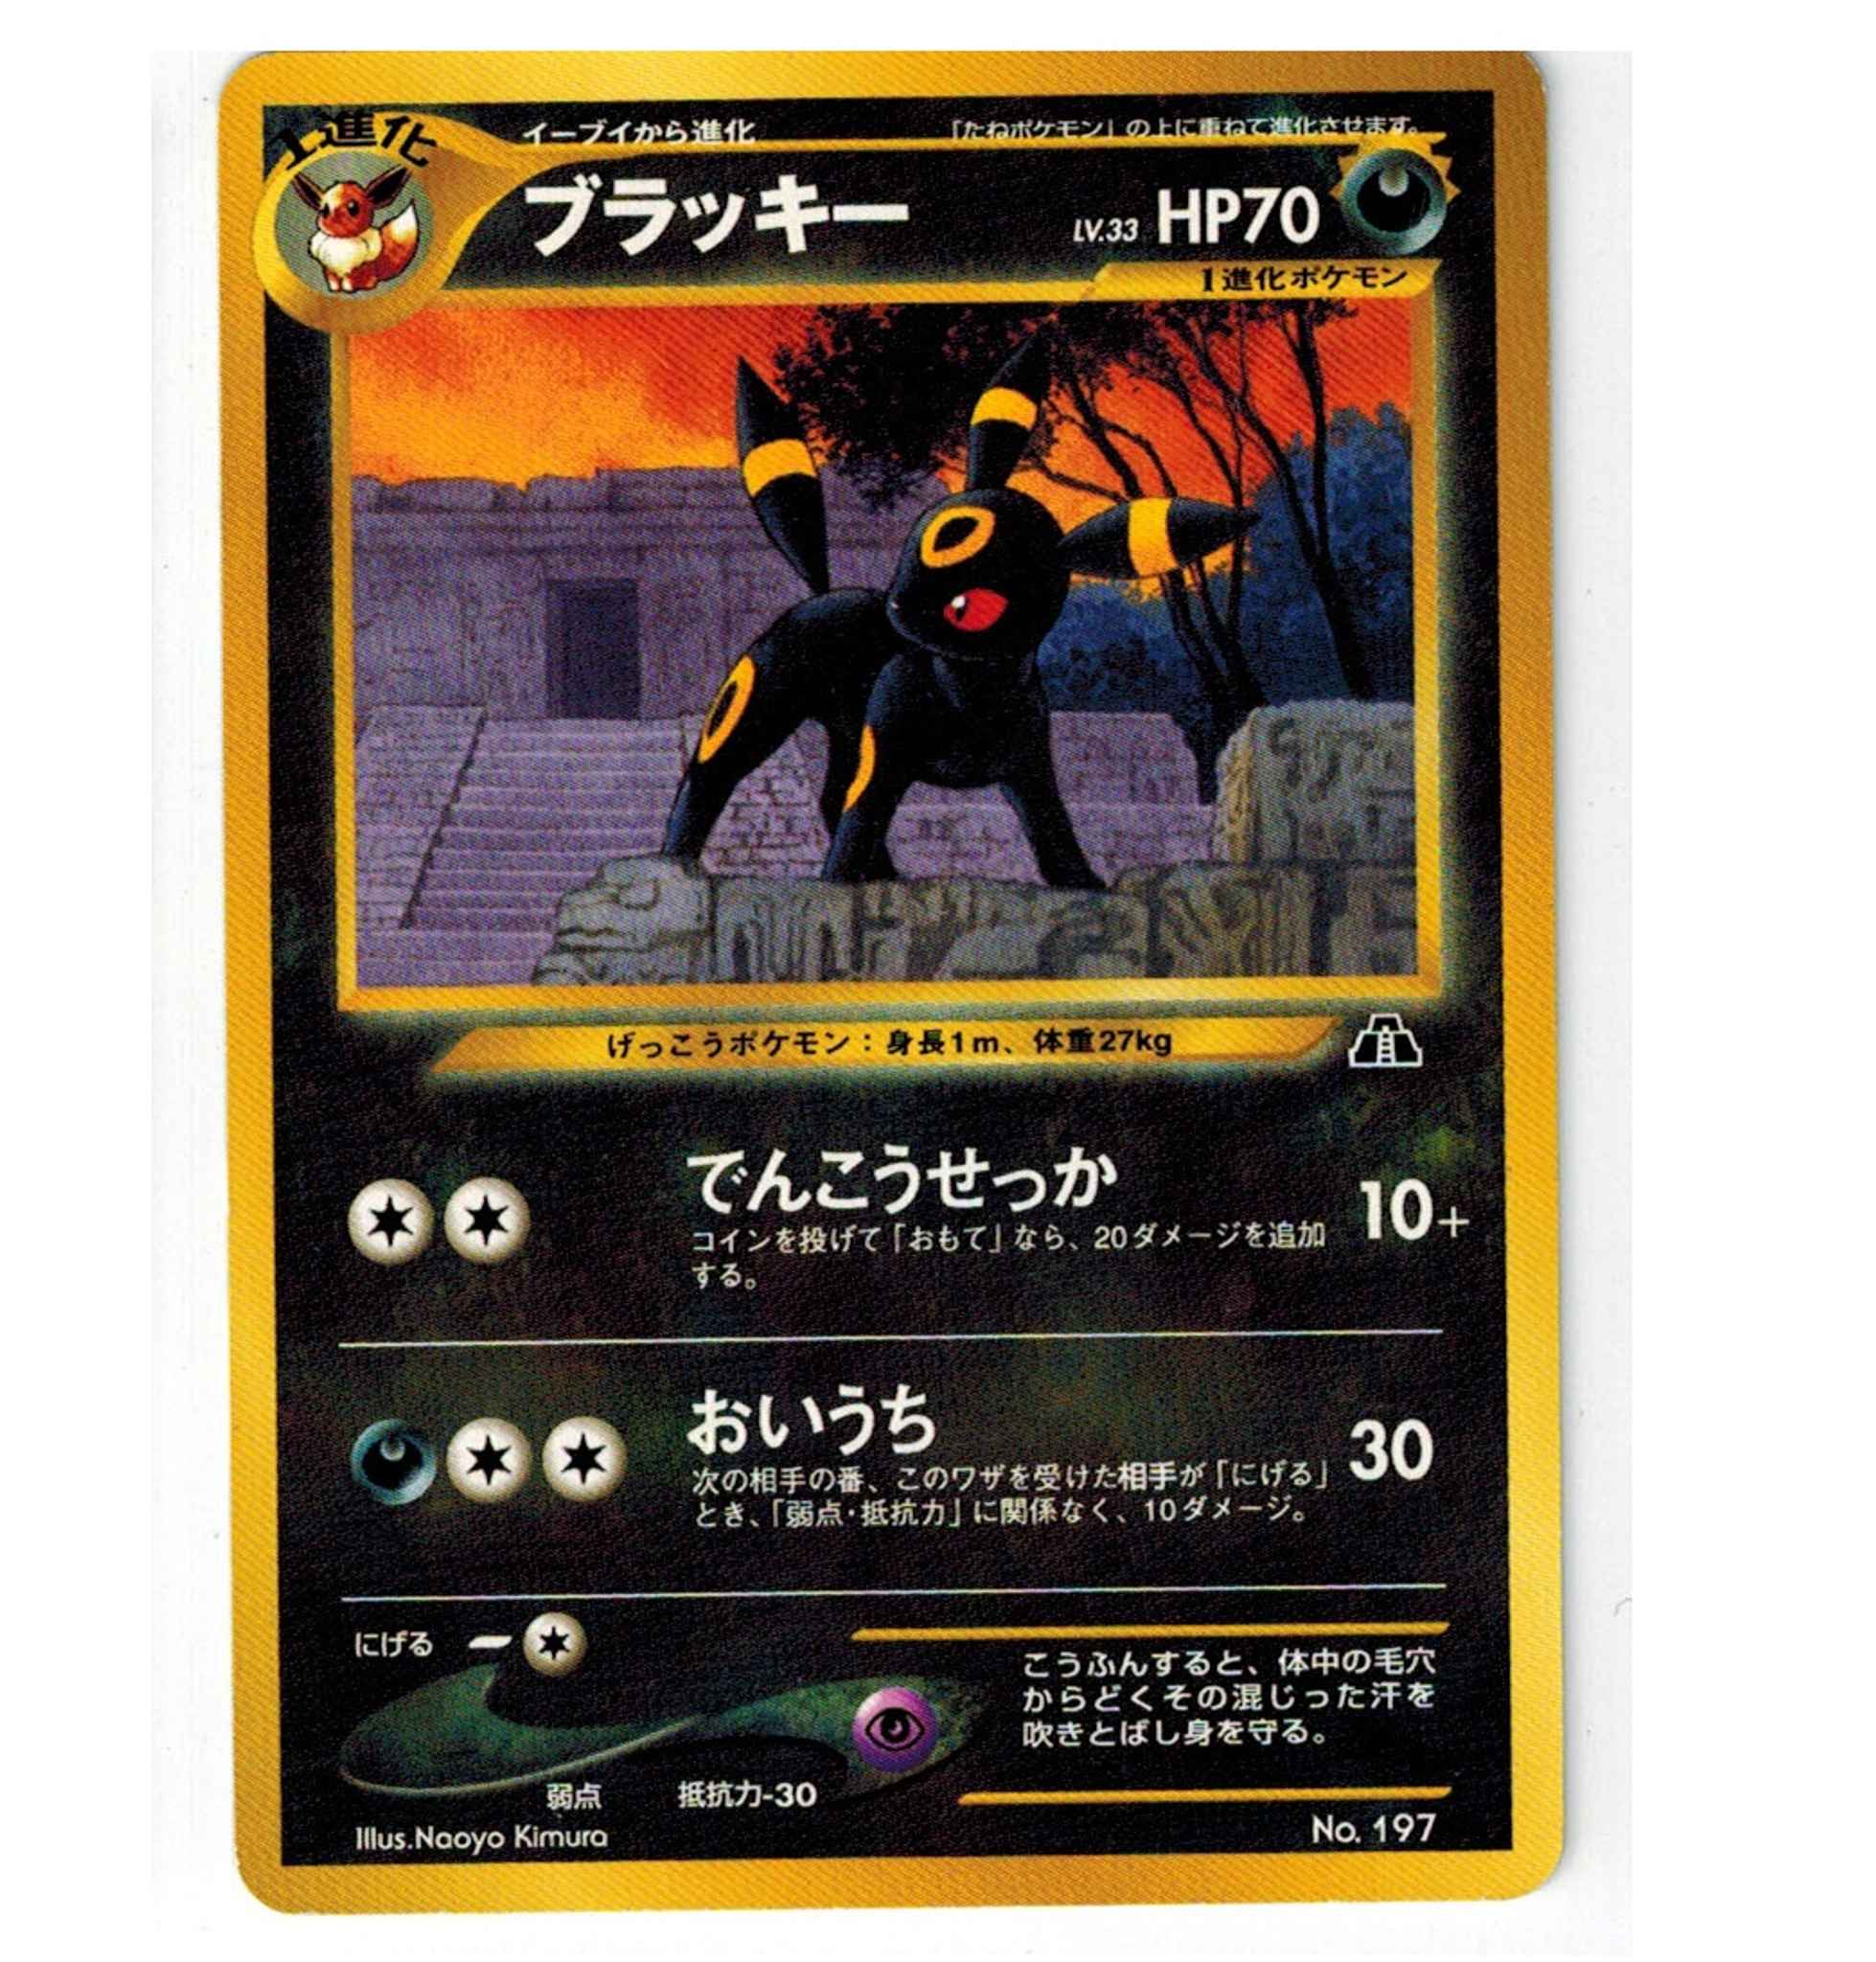 Umbreon Japanese No 197 Neo 2 Hp70 Non Holo Promo Umbreon 32 Neo Discovery Pokemon Online Gaming Store For Cards Miniatures Singles Packs Booster Boxes